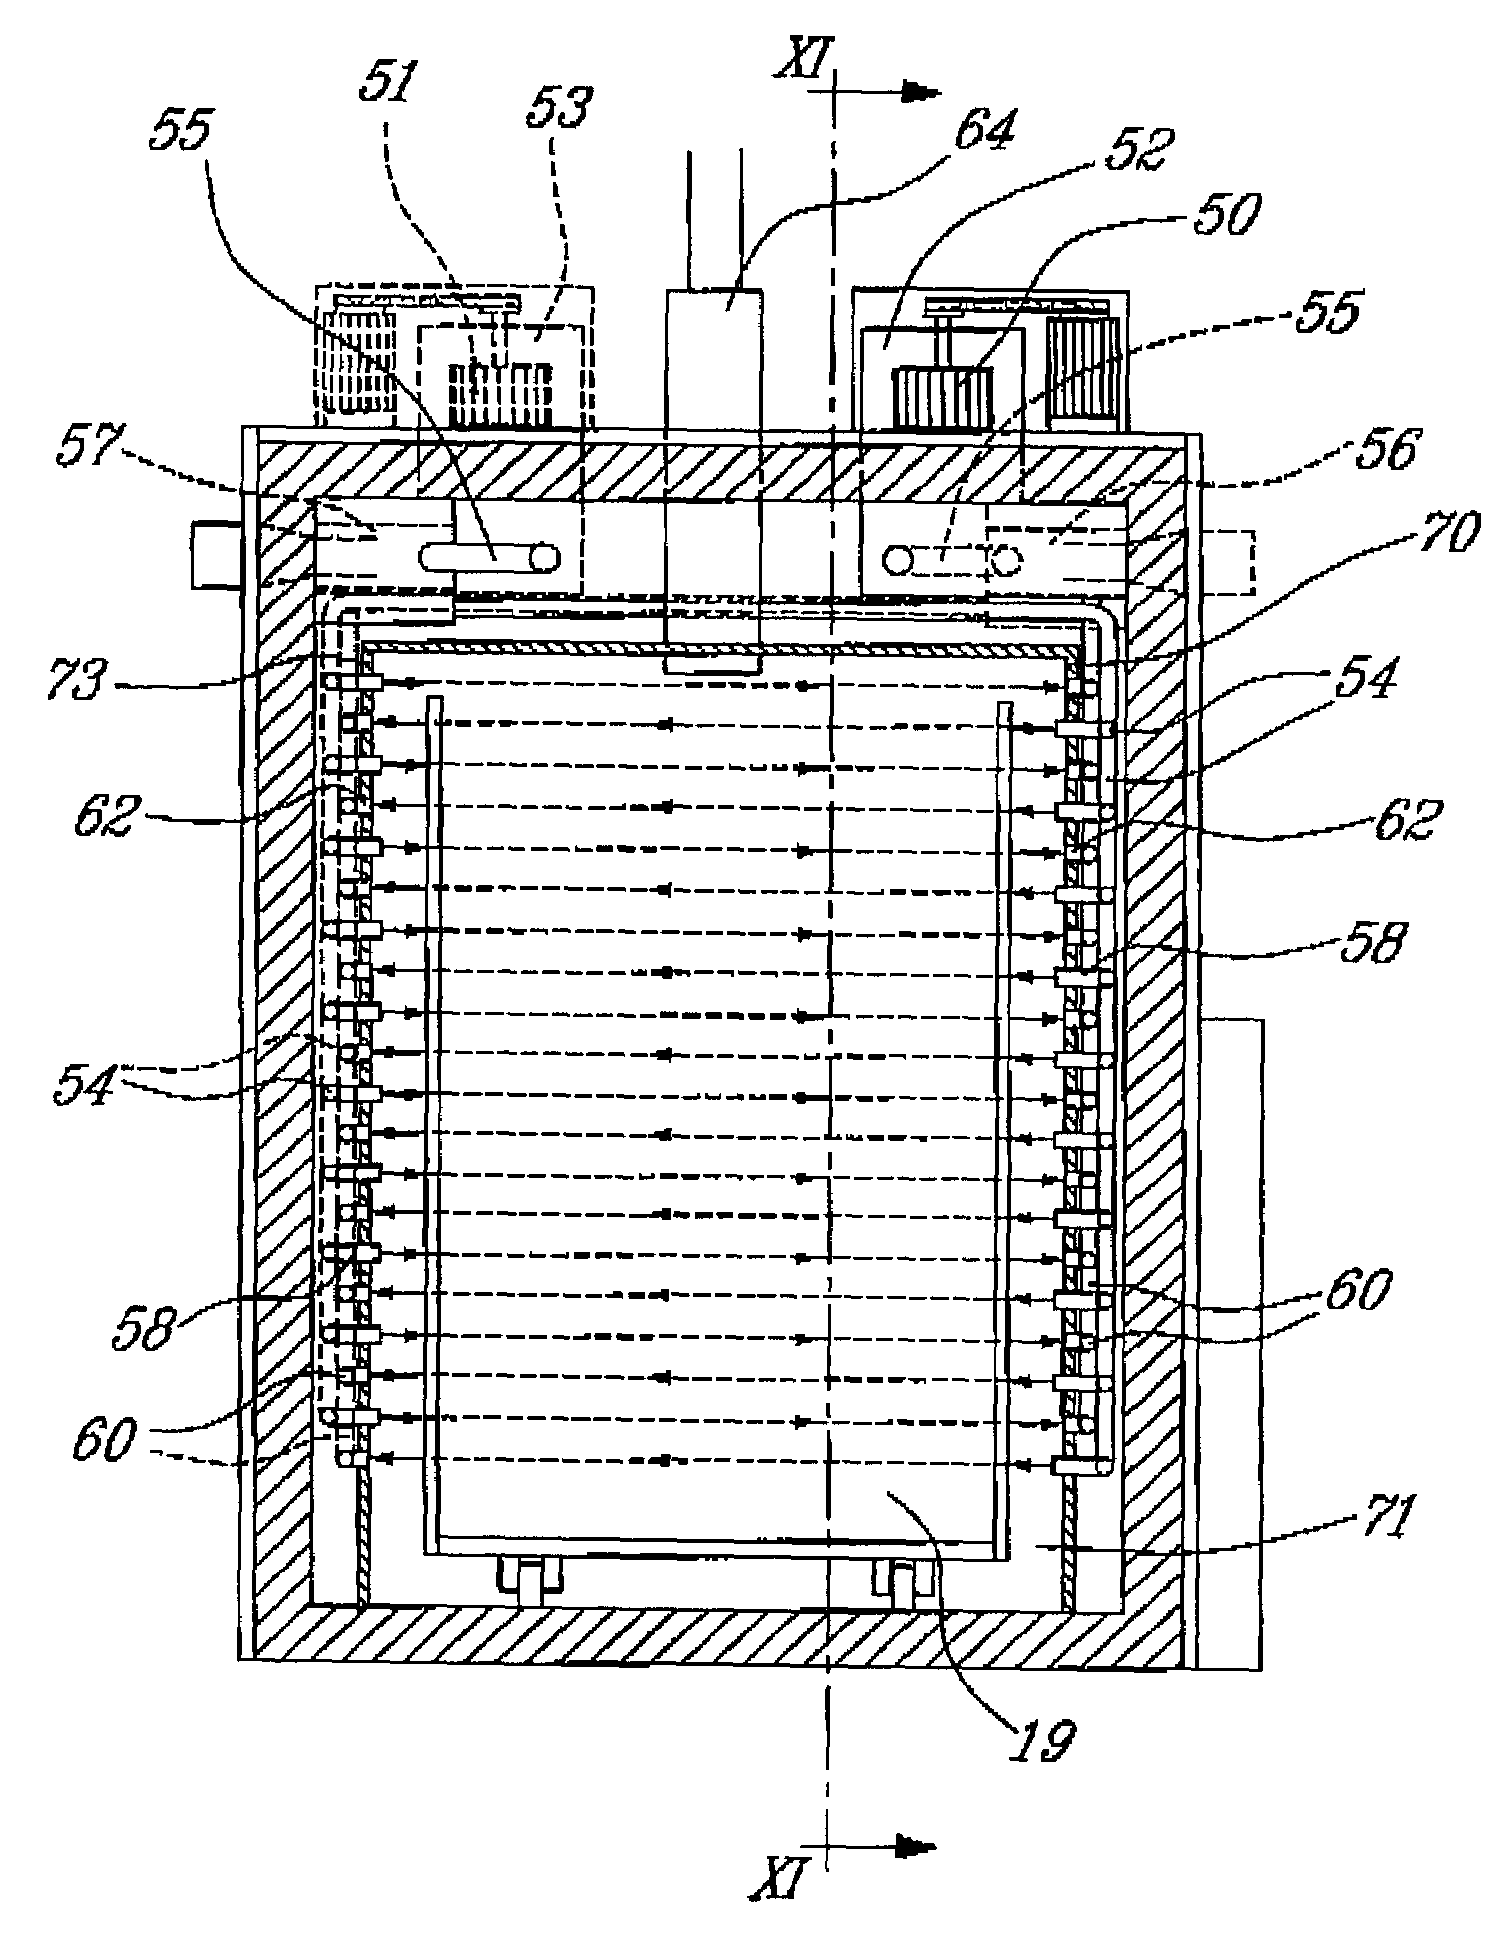 Apparatus and method for the heat treatment of lignocellulosic material